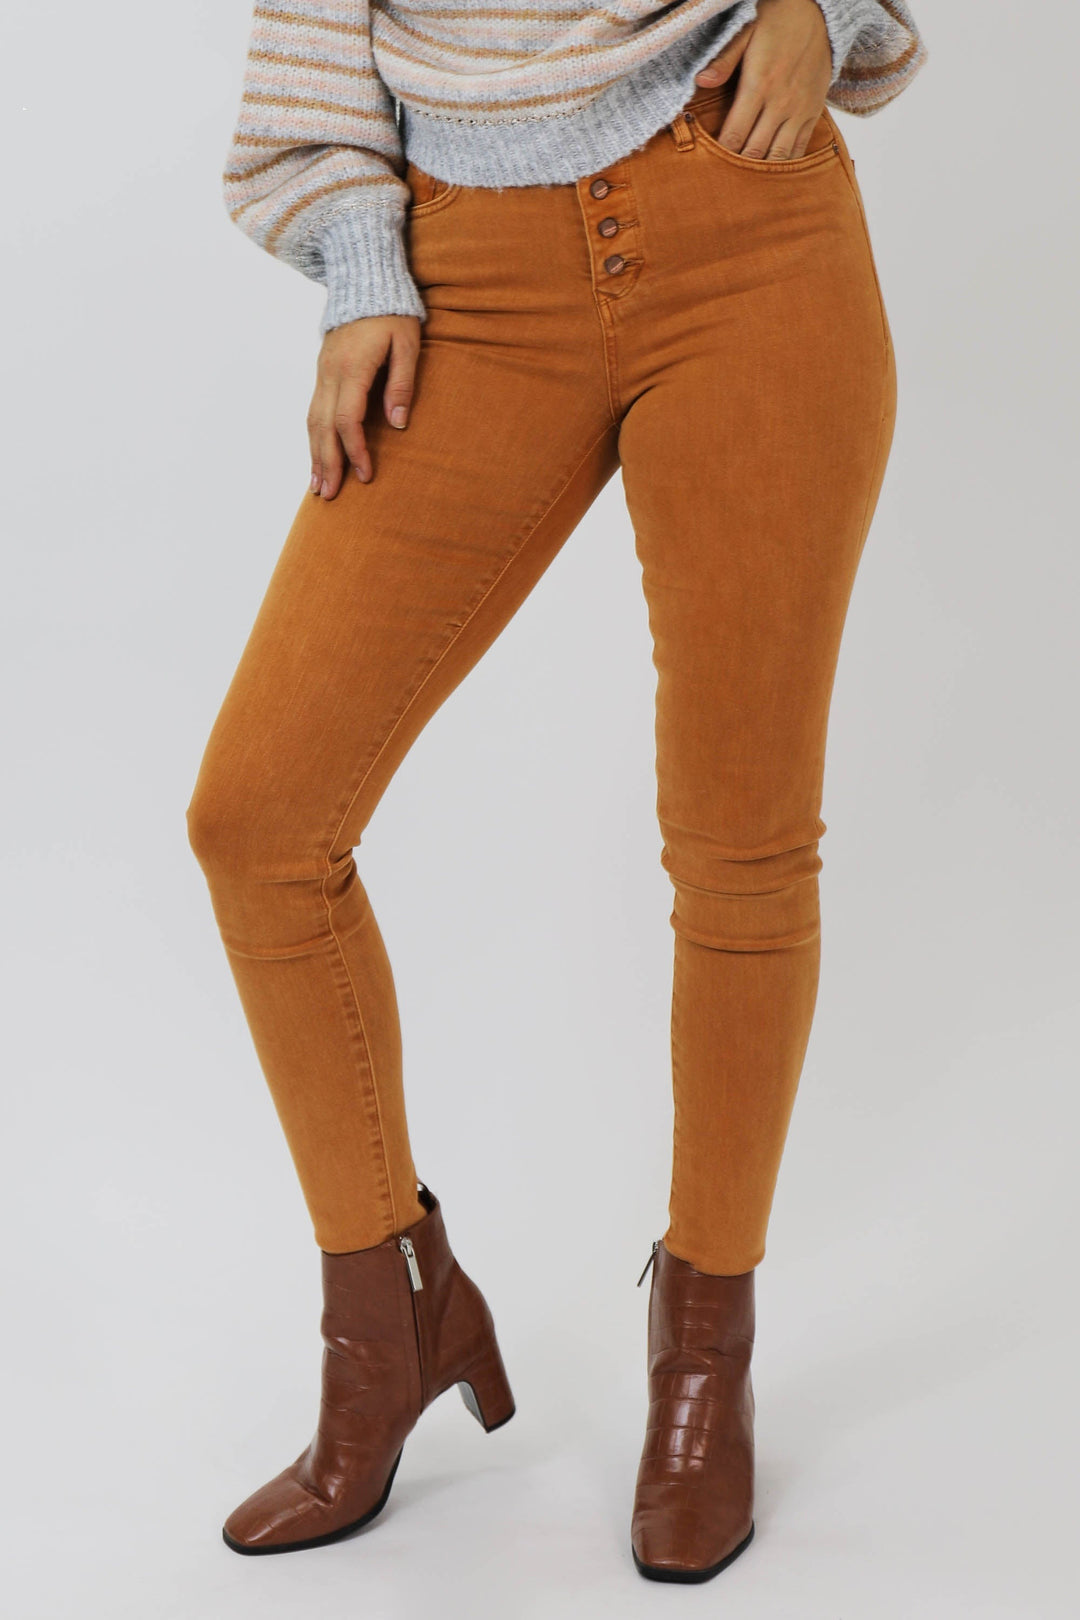 image of a female model wearing a GISELE HIGH RISE ANKLE SKINNY JEANS MACCHIATO JEANS